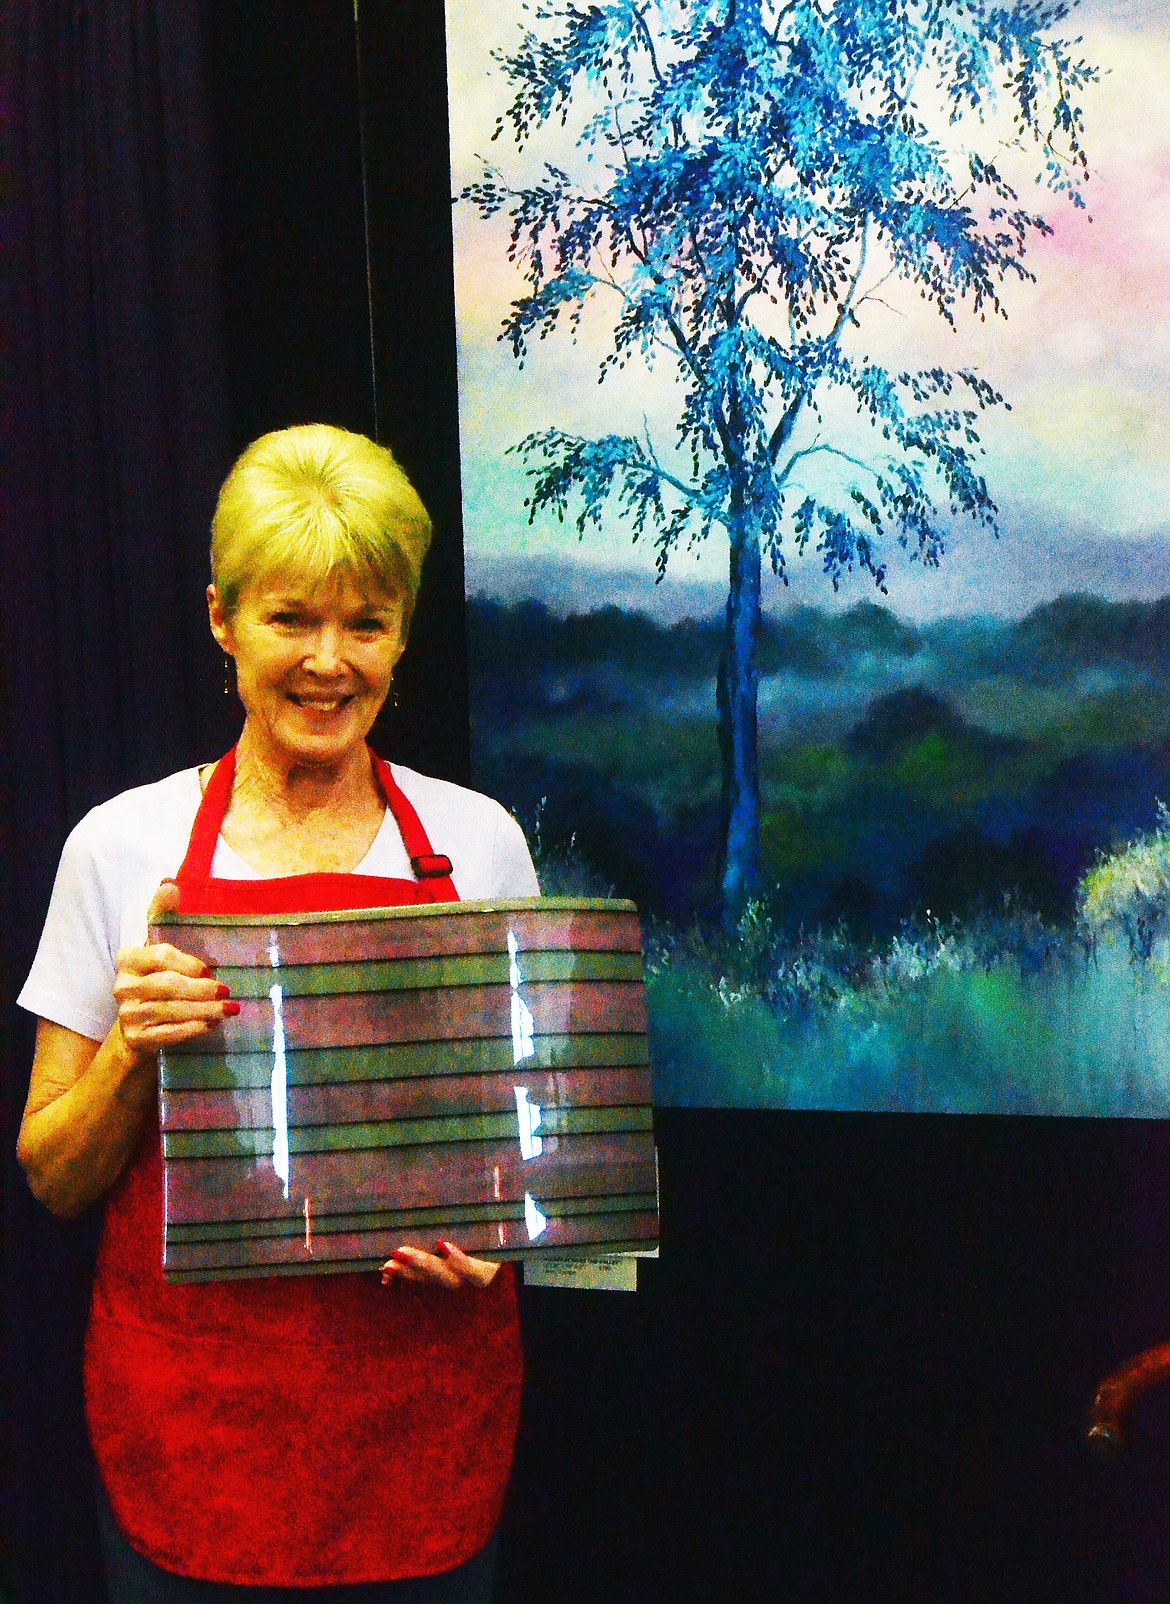 Karen M Thorson with two of her works showcased, &#145;Sweet Sixteen&#146; glass ware and &#145;Storm Across The Valley&#146; oil painting.